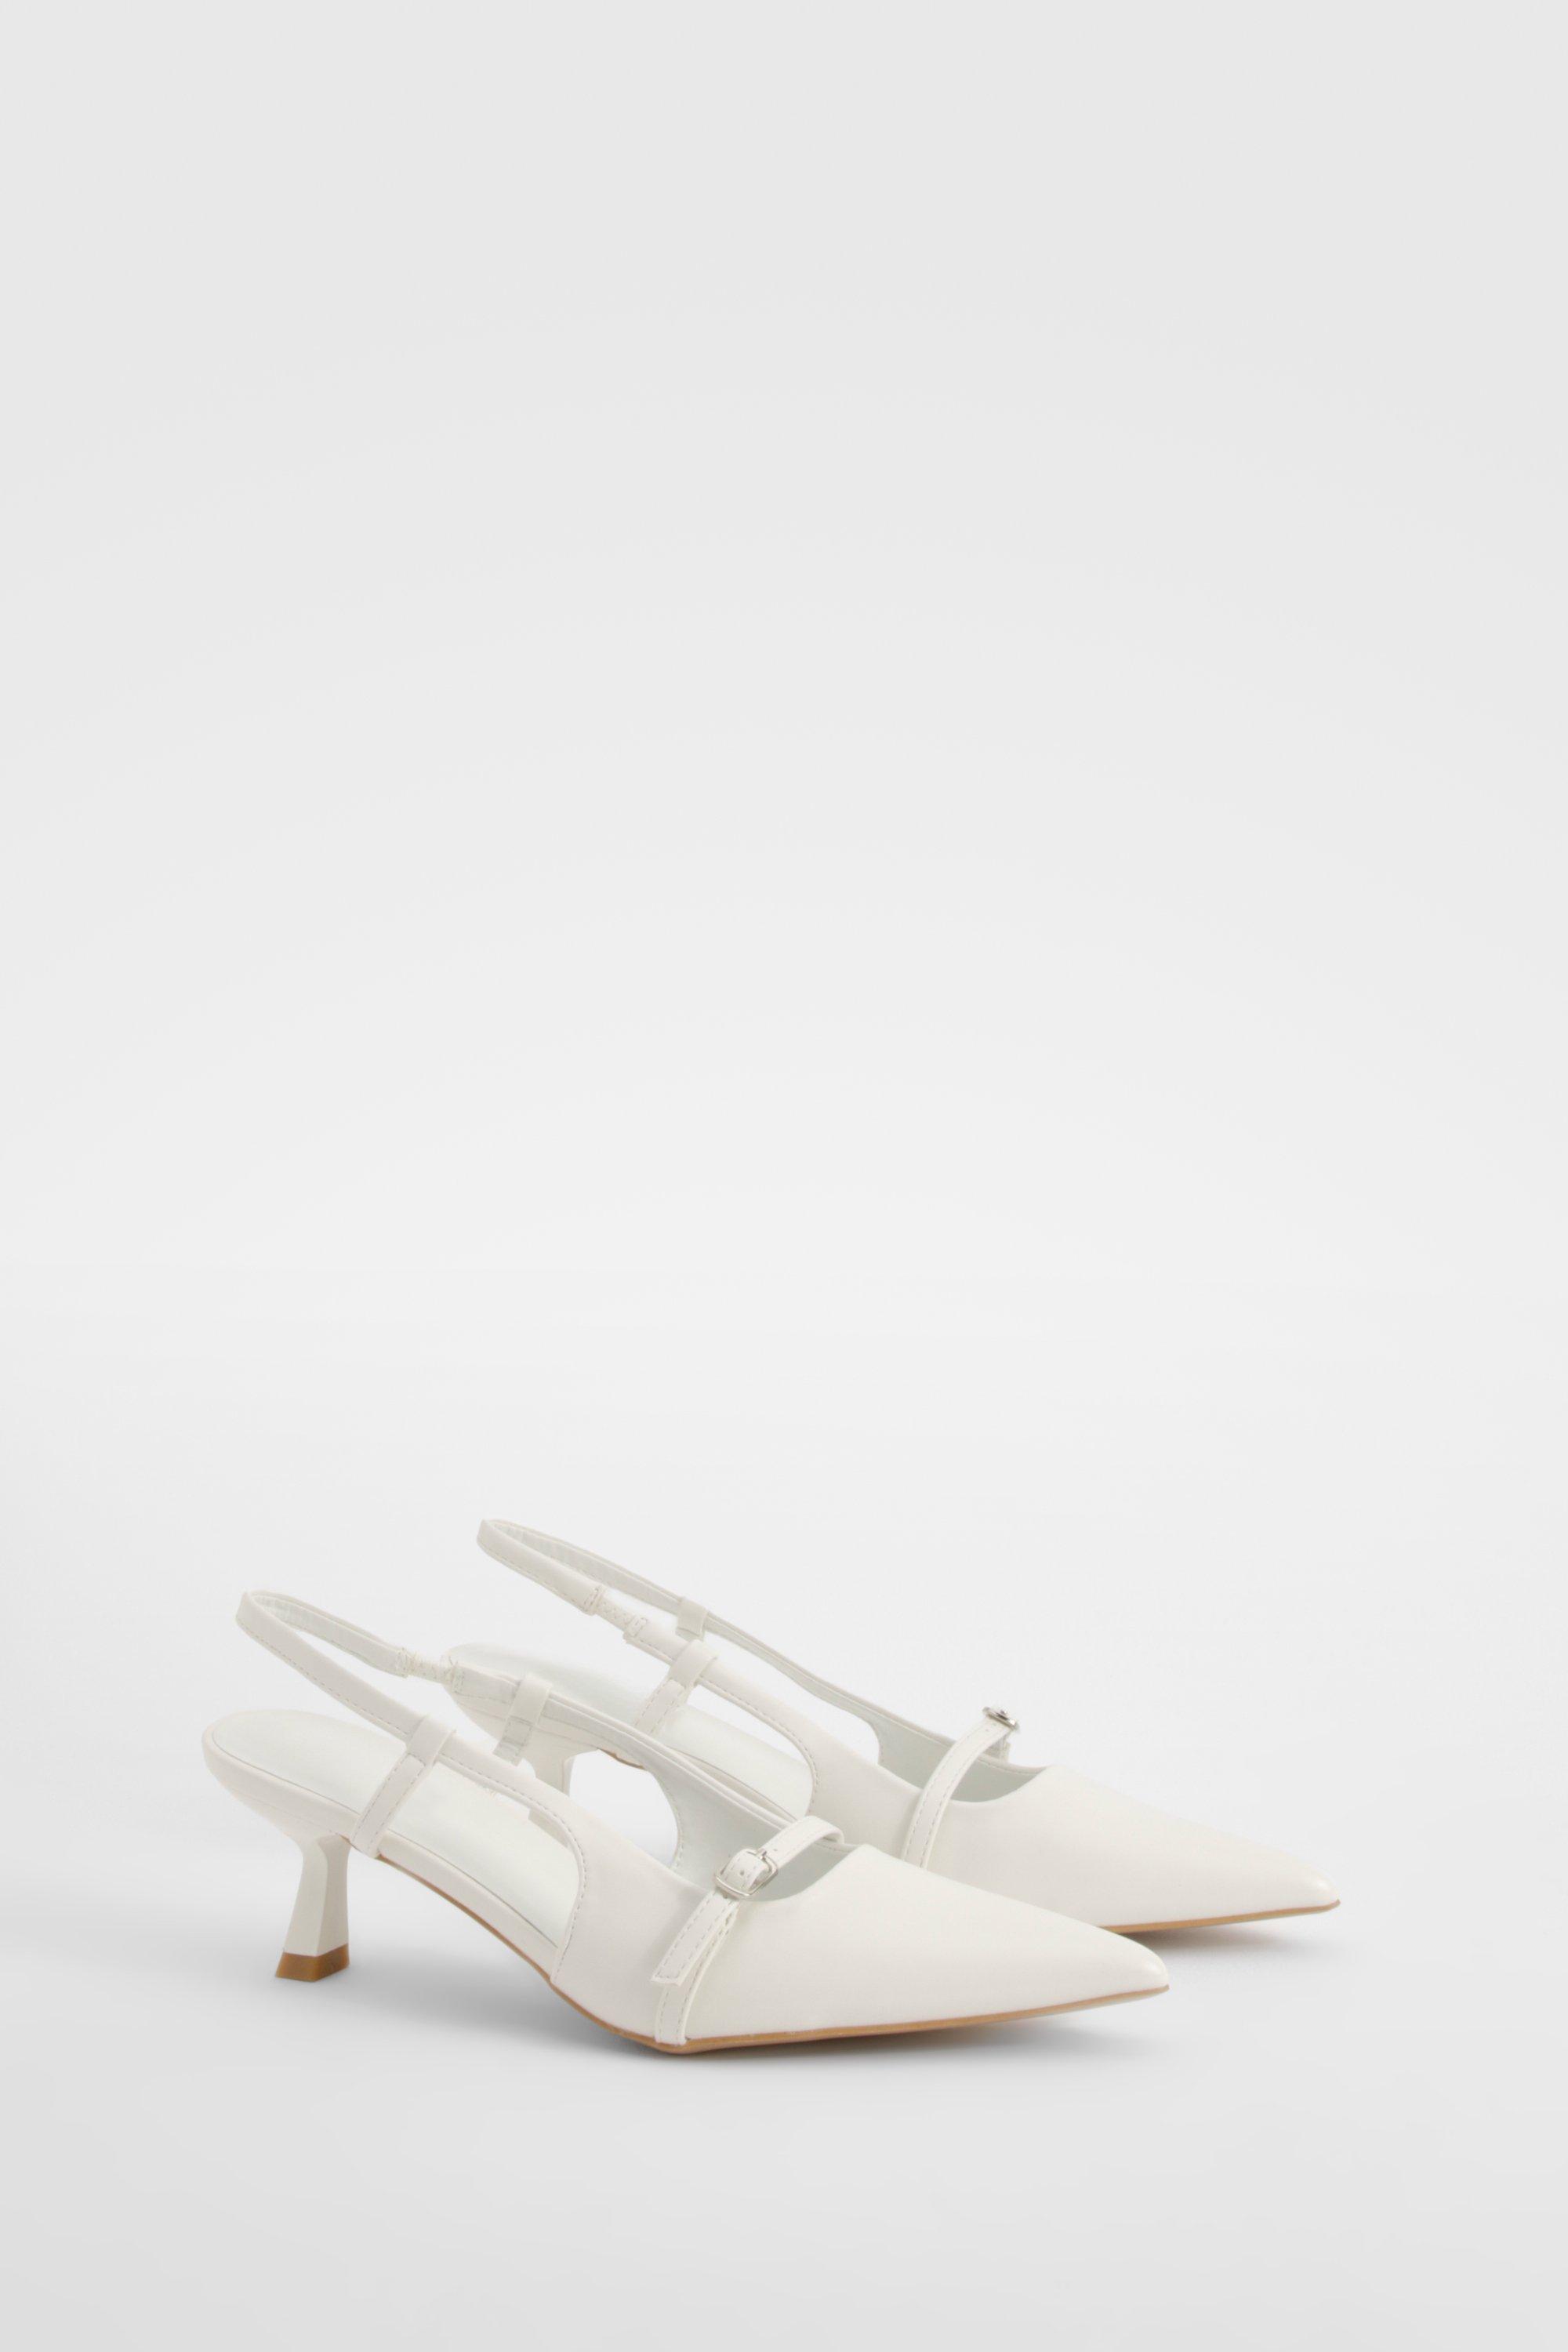 Dior “J'Adior” White Kitten Heels | Life in a Cold Climate